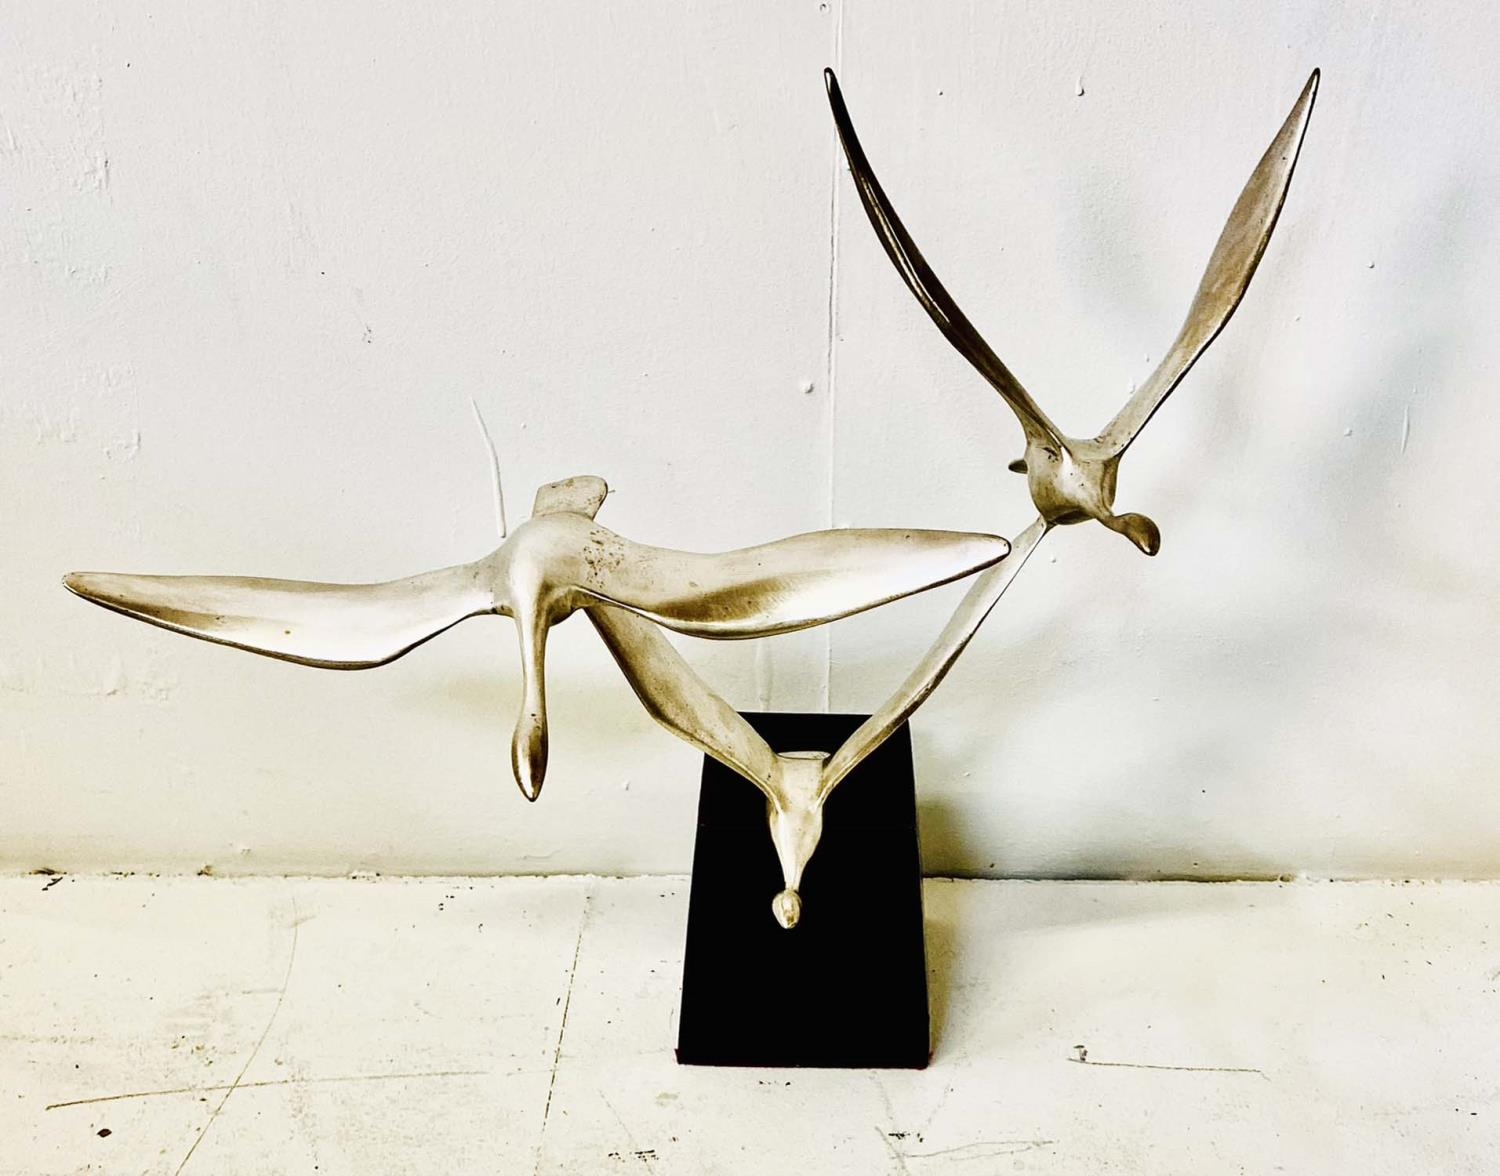 CONTEMPORARY SCHOOL SCULPTURE, silvered bronze of flying birds, 50cm H x 58cm W x 34cm D. - Image 5 of 6